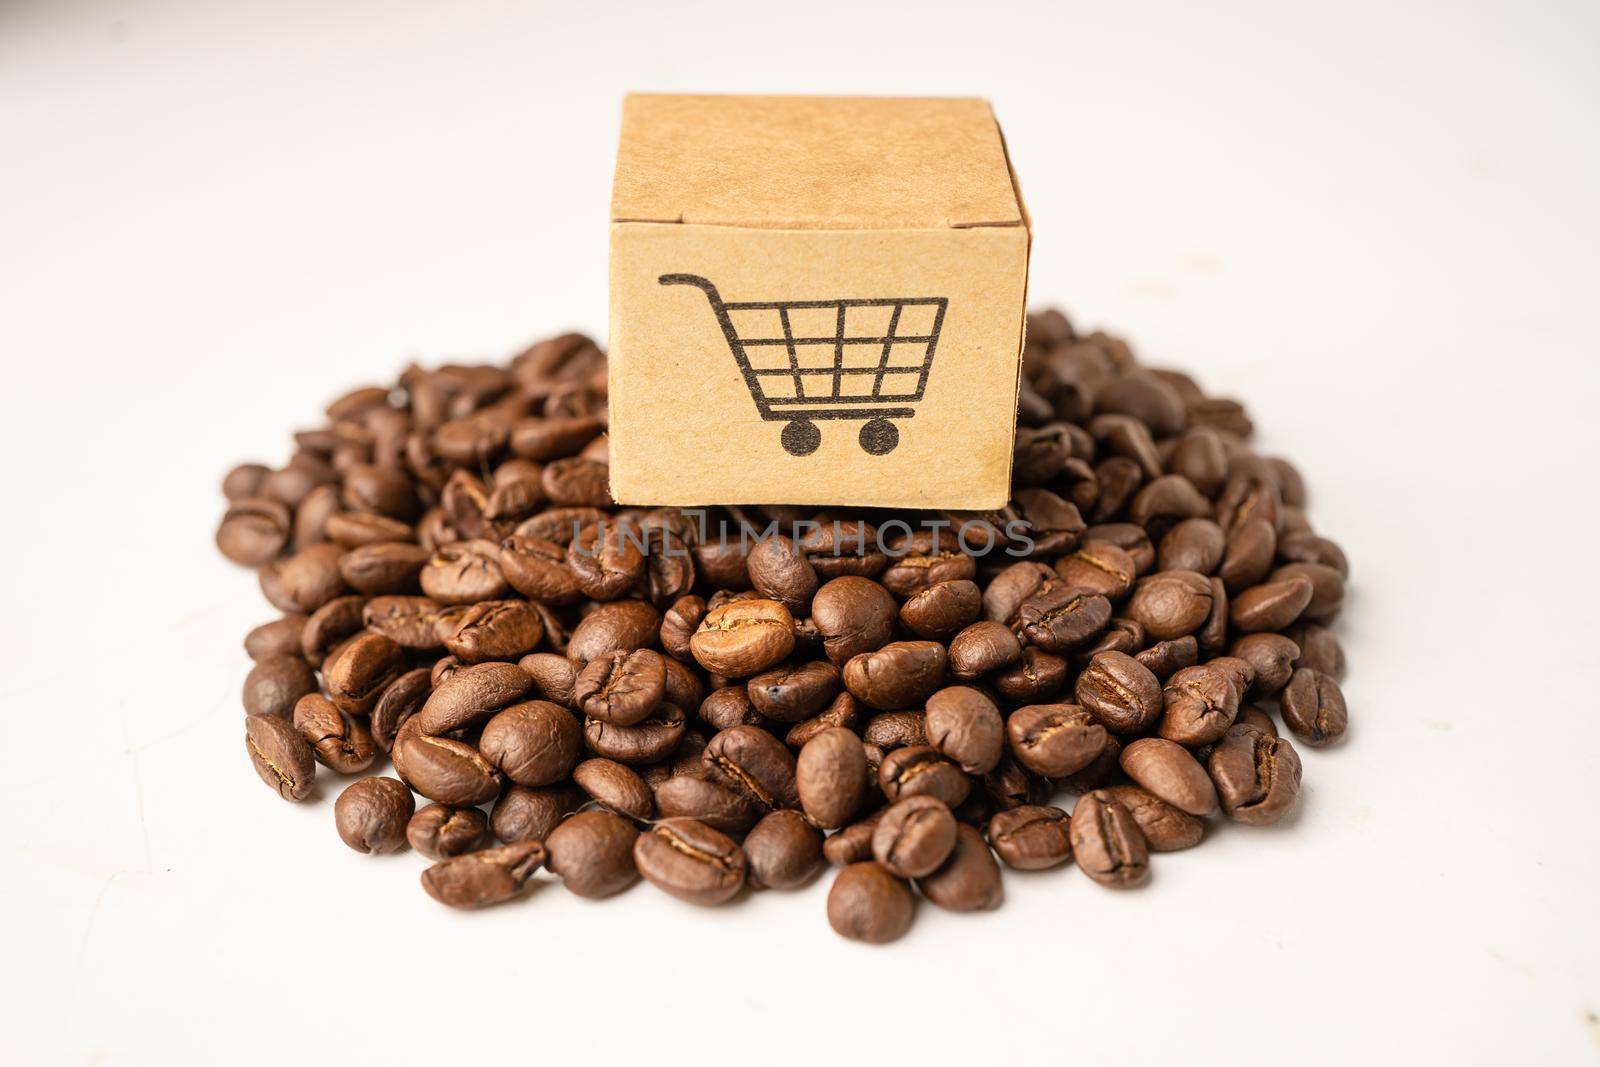 Box with shopping cart logo symbol on coffee beans, Import Export Shopping online or eCommerce delivery service store product shipping, trade, supplier concept. by pamai